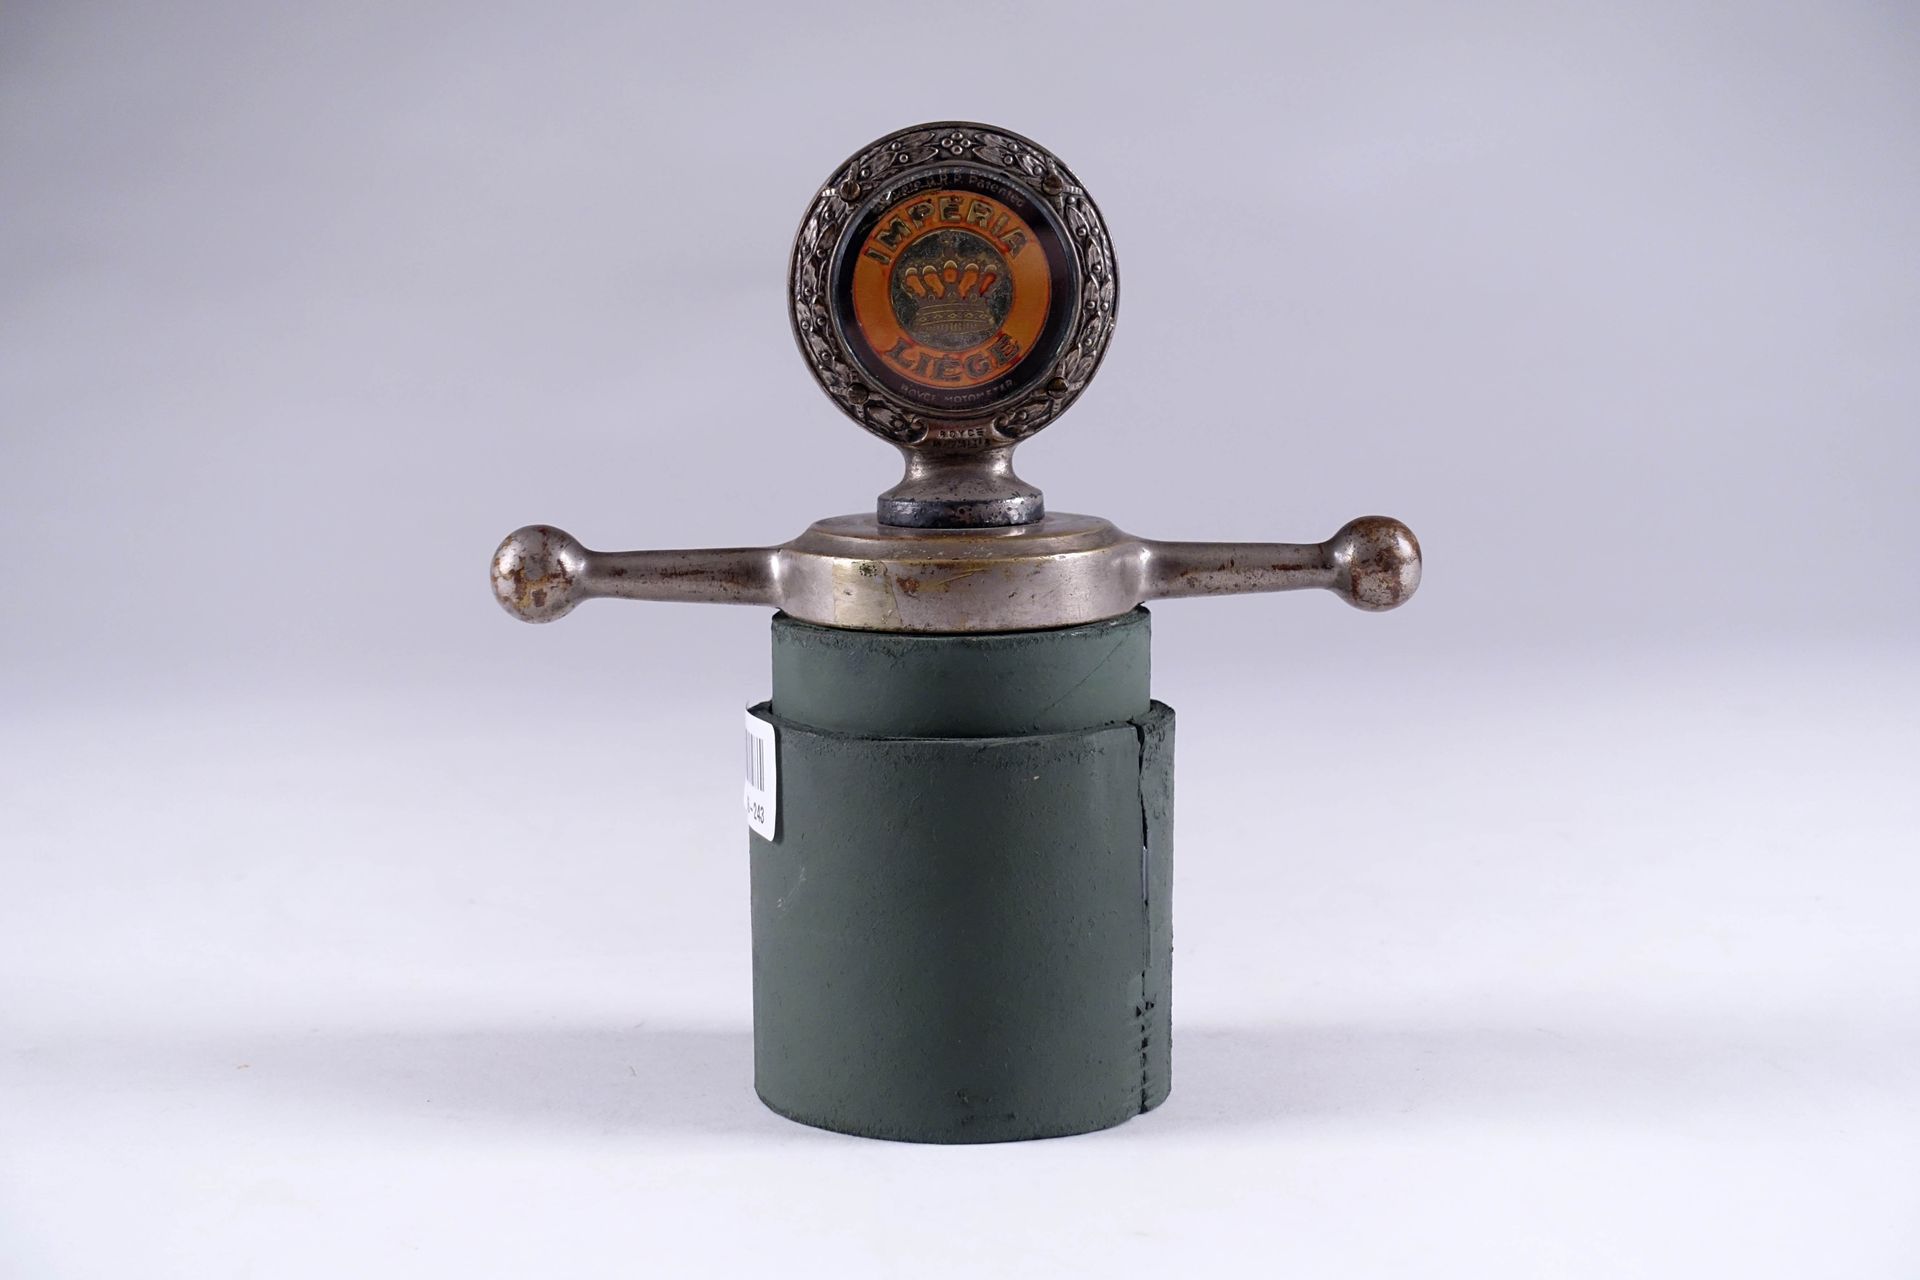 Imperia - Liège. Radiator cap with "Boyce Motometer" thermometer circled with a &hellip;